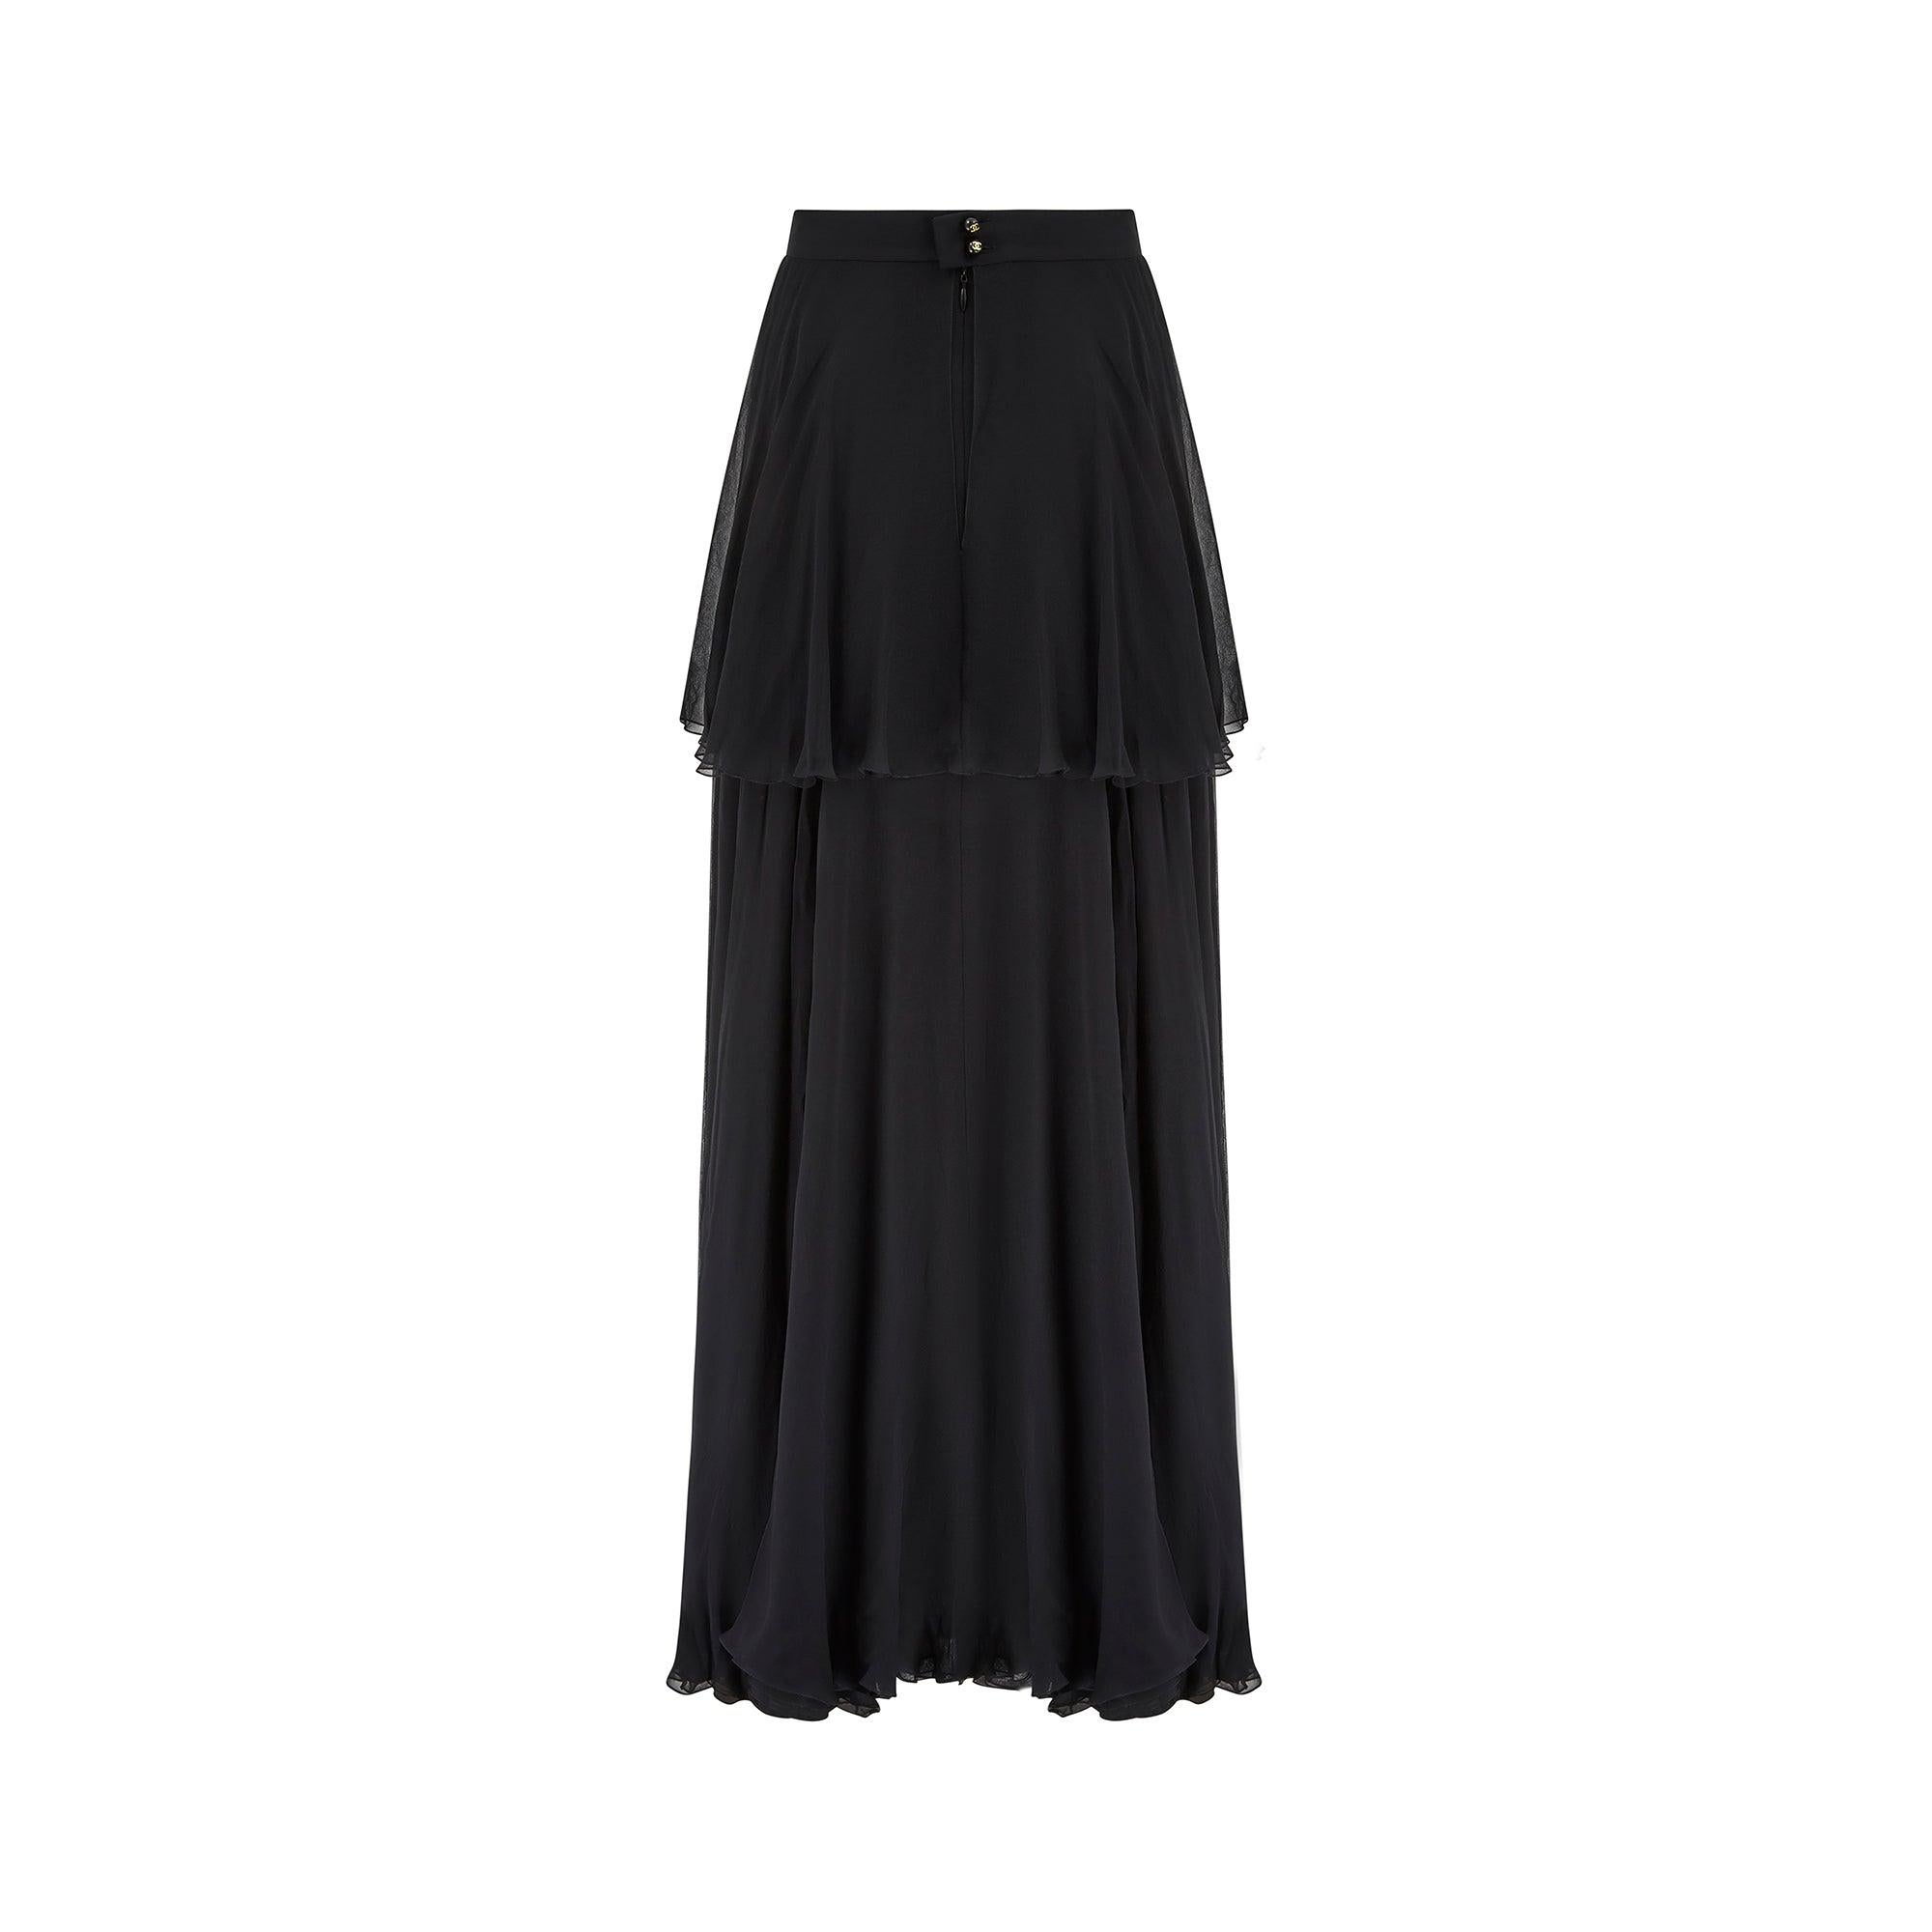 1995 Chanel Black Silk Chiffon Maxi Skirt In Excellent Condition For Sale In London, GB